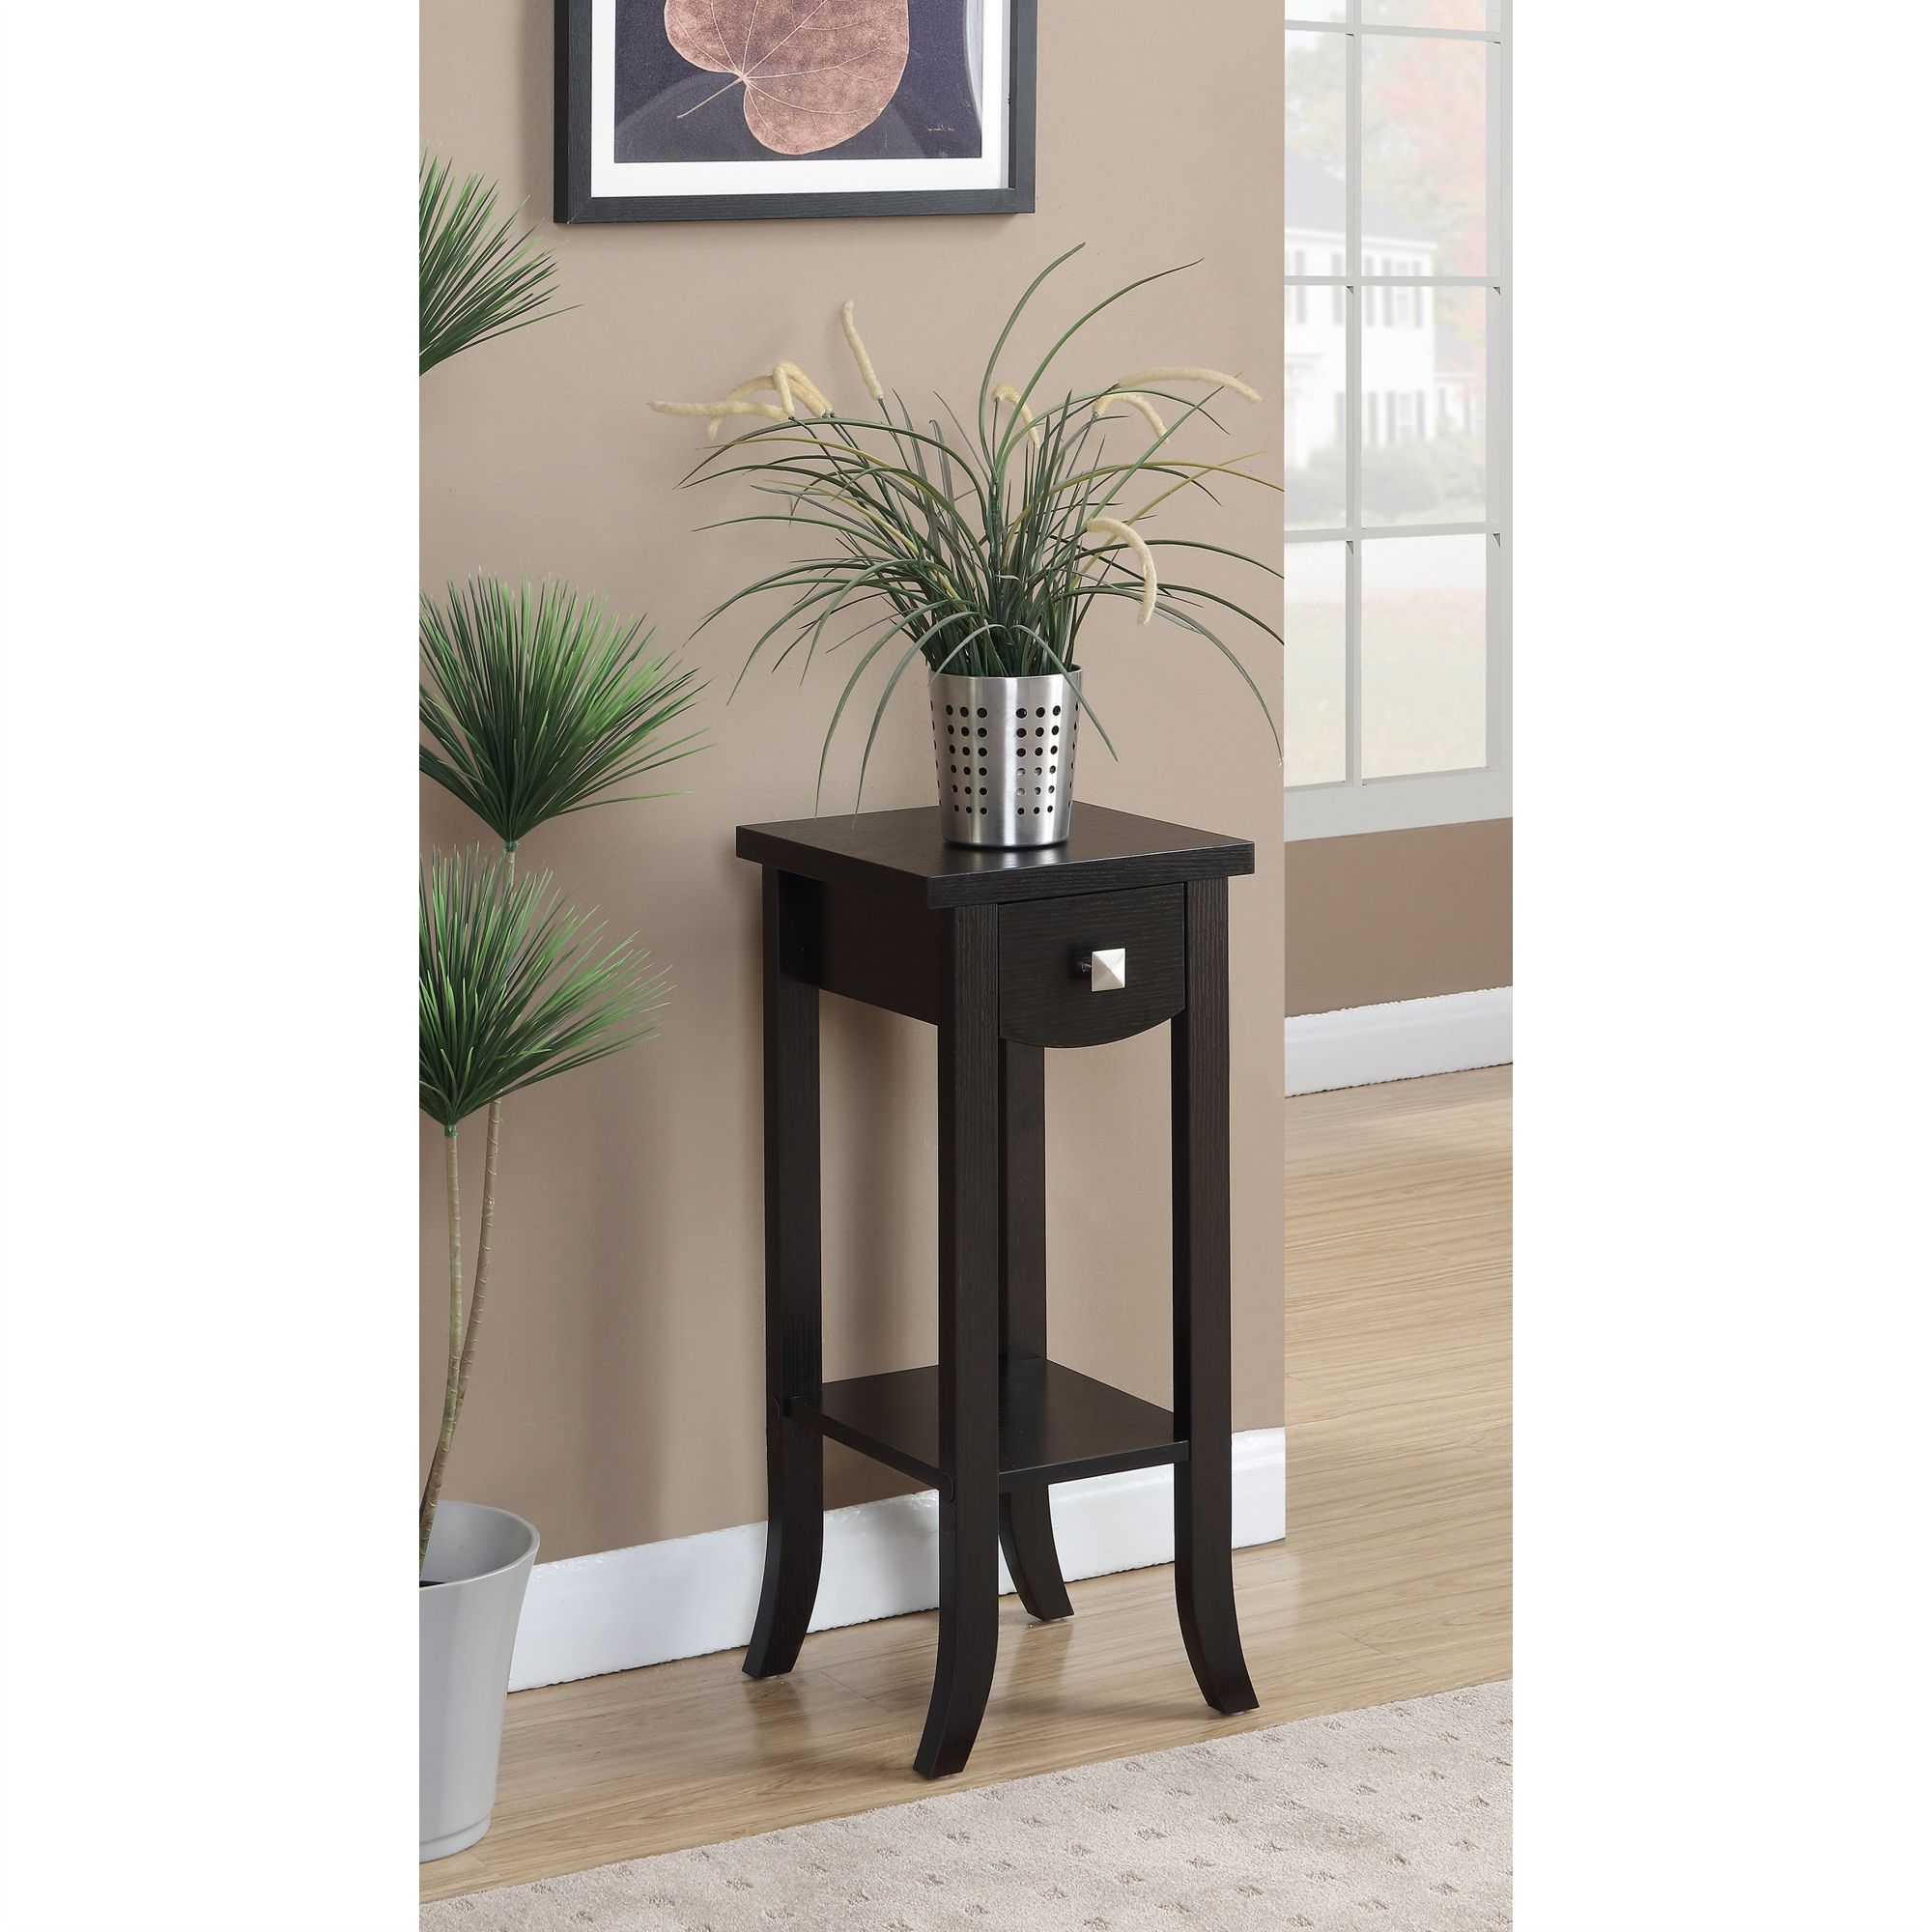 Widely Used Newport Prism Medium Plant Stand – Walmart Regarding Prism Plant Stands (View 1 of 15)